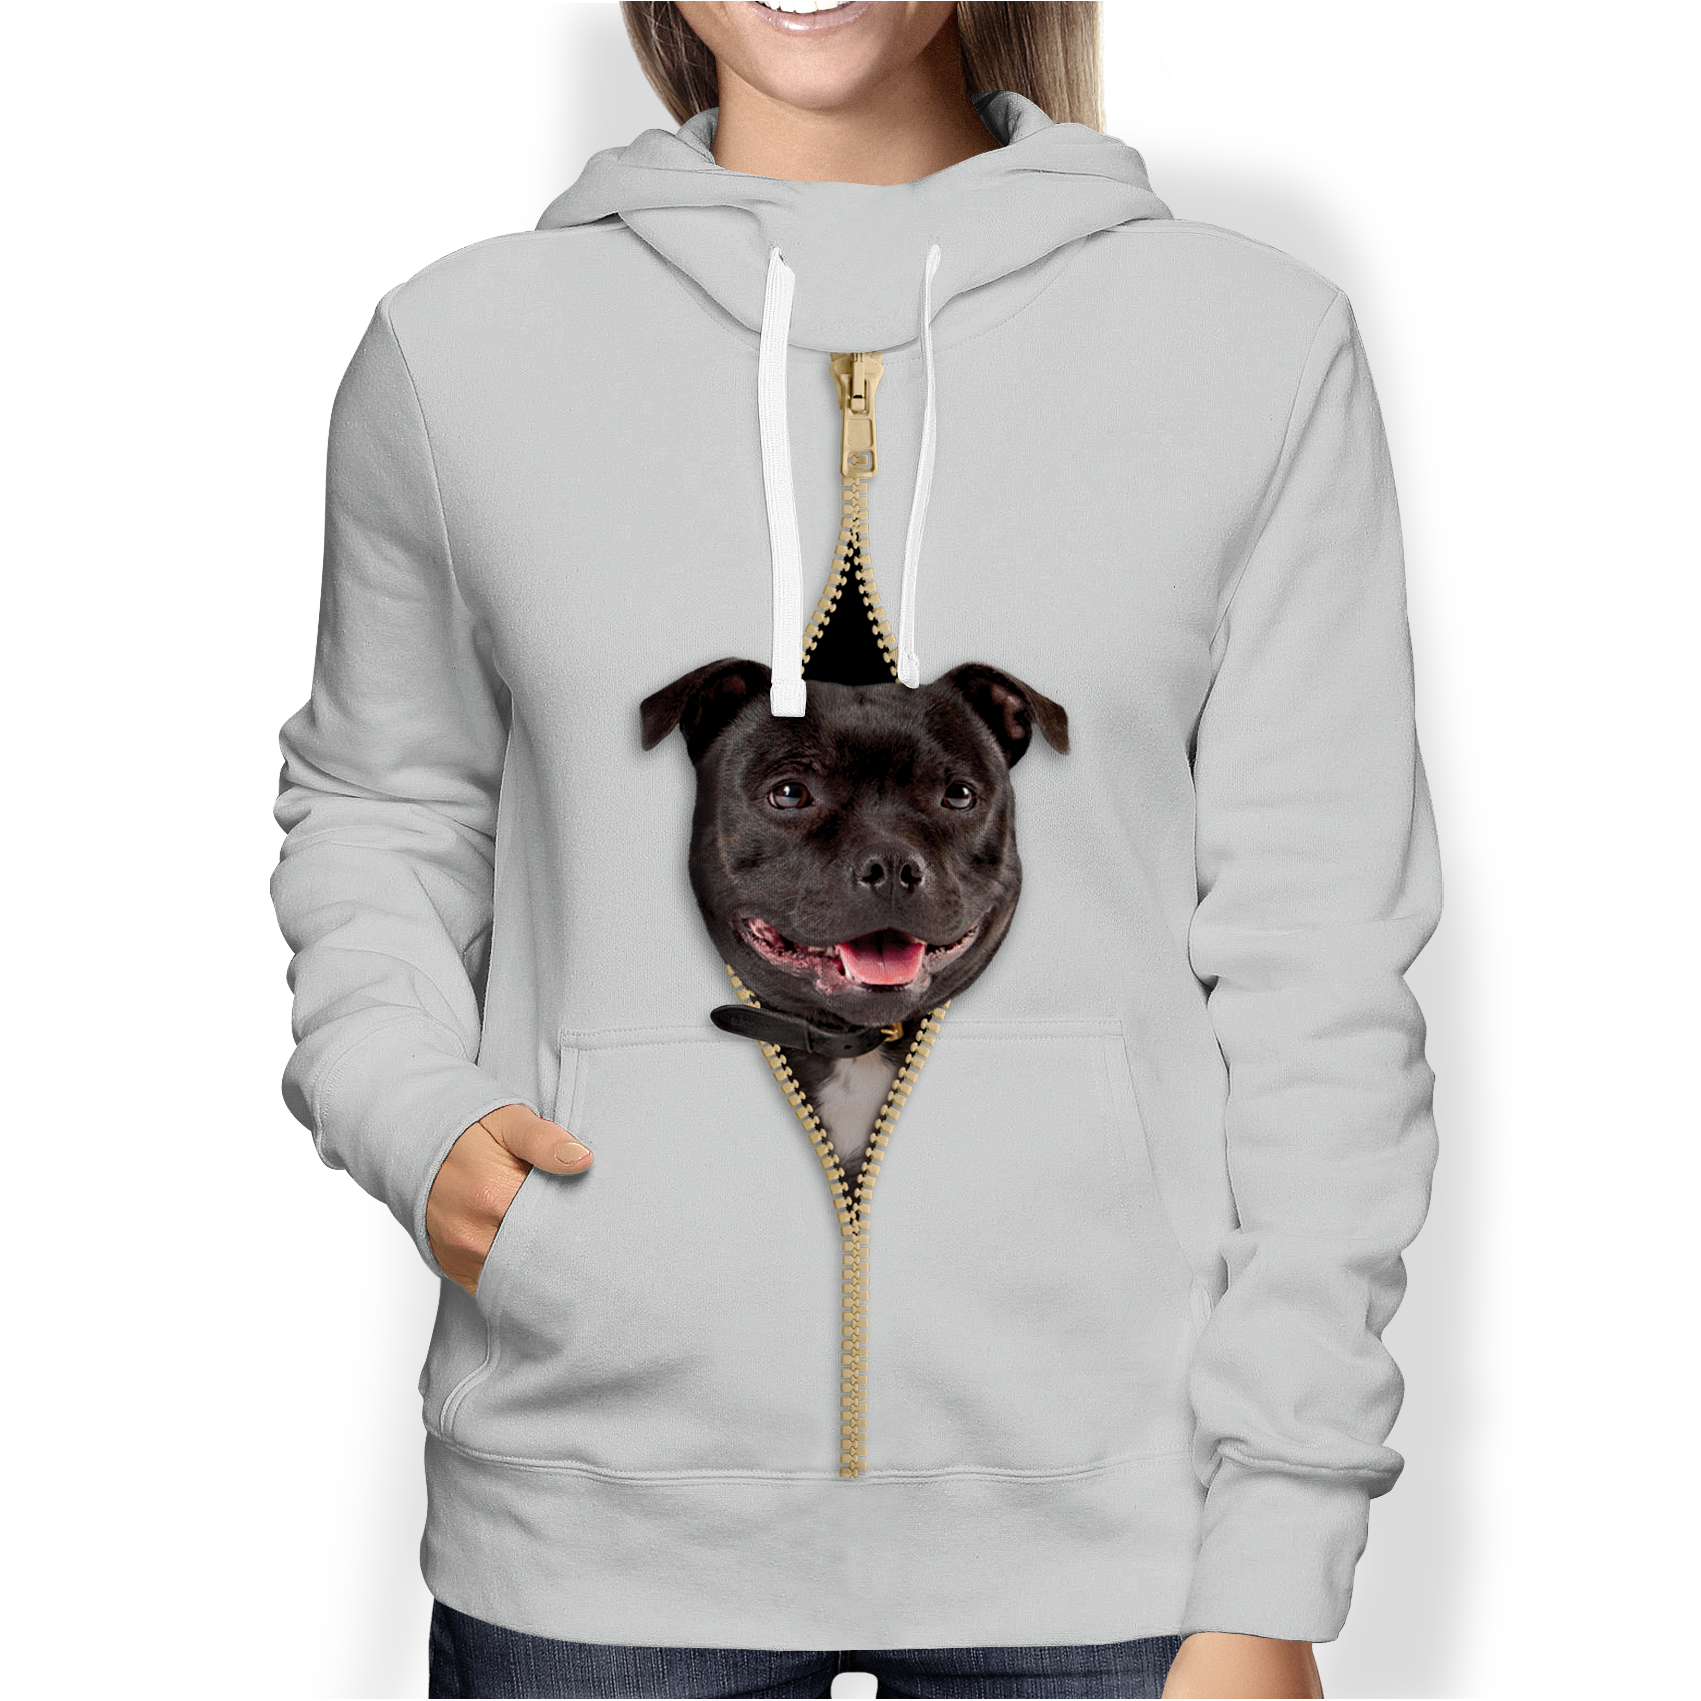 I'm With You - Staffordshire Bull Terrier Hoodie V2